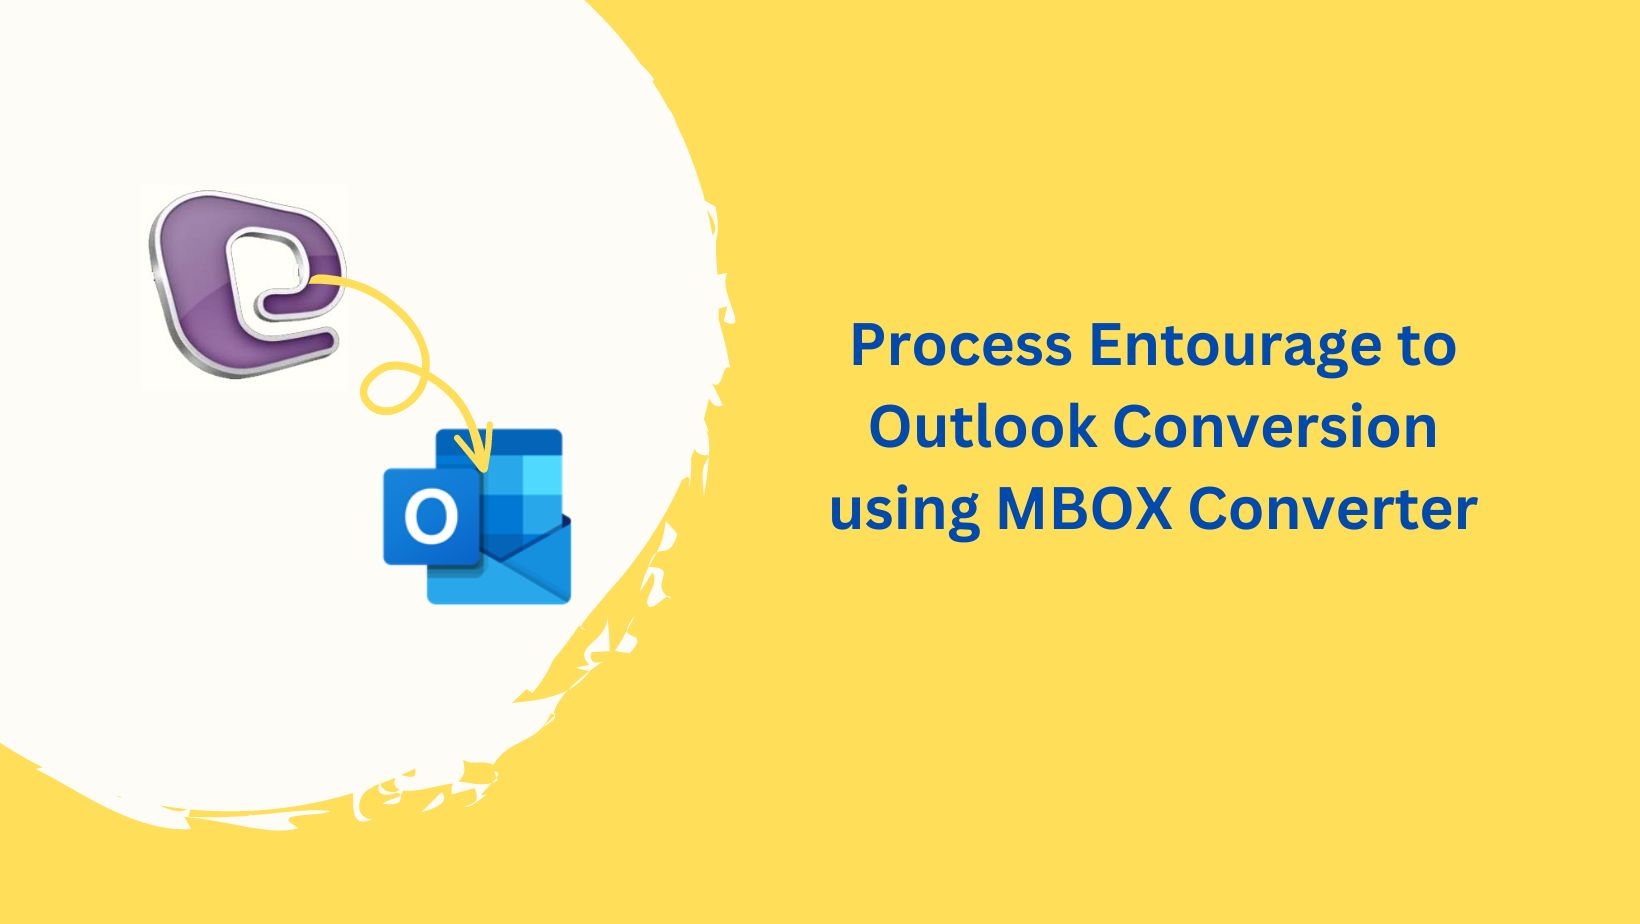 Process Entourage to Outlook Conversion using MBOX Converter